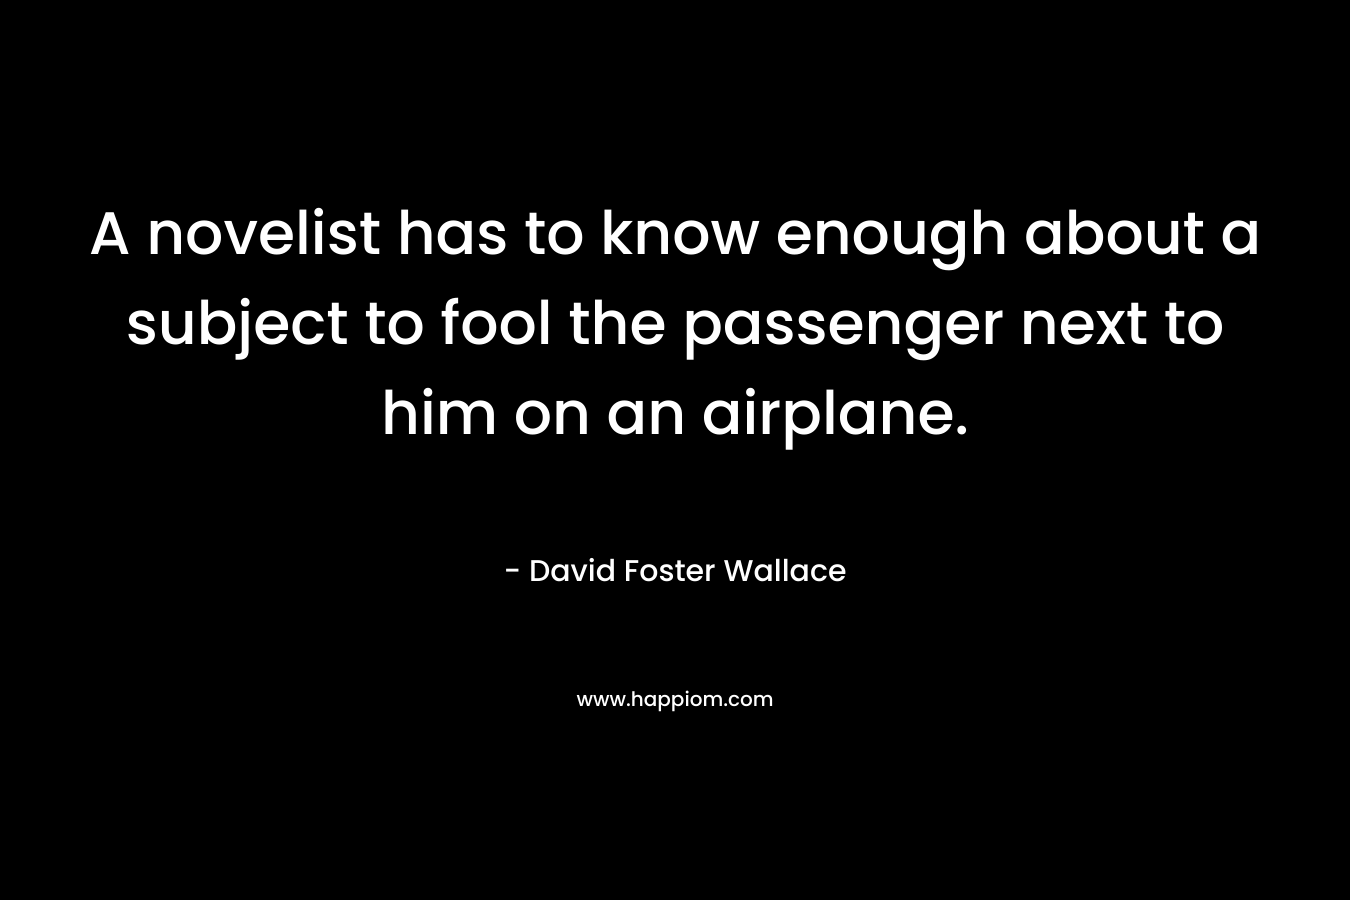 A novelist has to know enough about a subject to fool the passenger next to him on an airplane. – David Foster Wallace